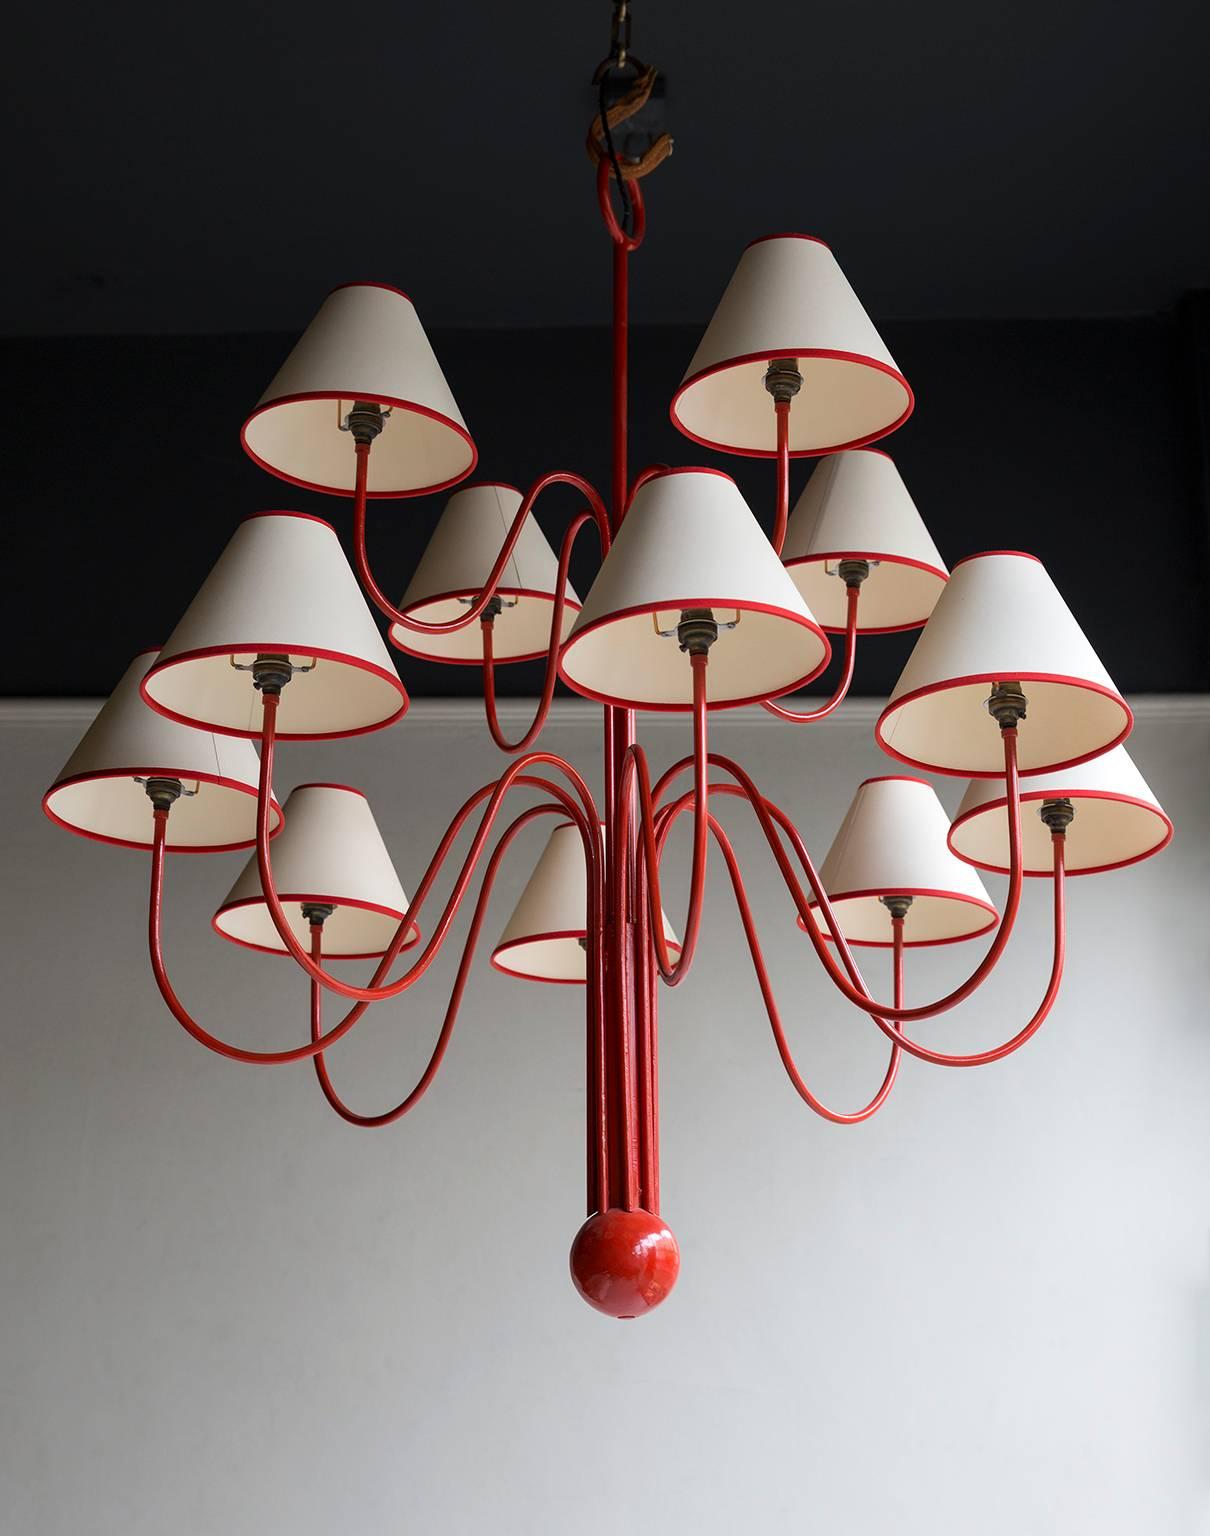 An original mid-20th century tubular steel chandelier (or lustre bouquet) attributed to Jean Royere, re-lacquered and akin to other well documented examples, French, circa 1950.

Jean Royère (1902-1981) studied the classics at Cambridge University